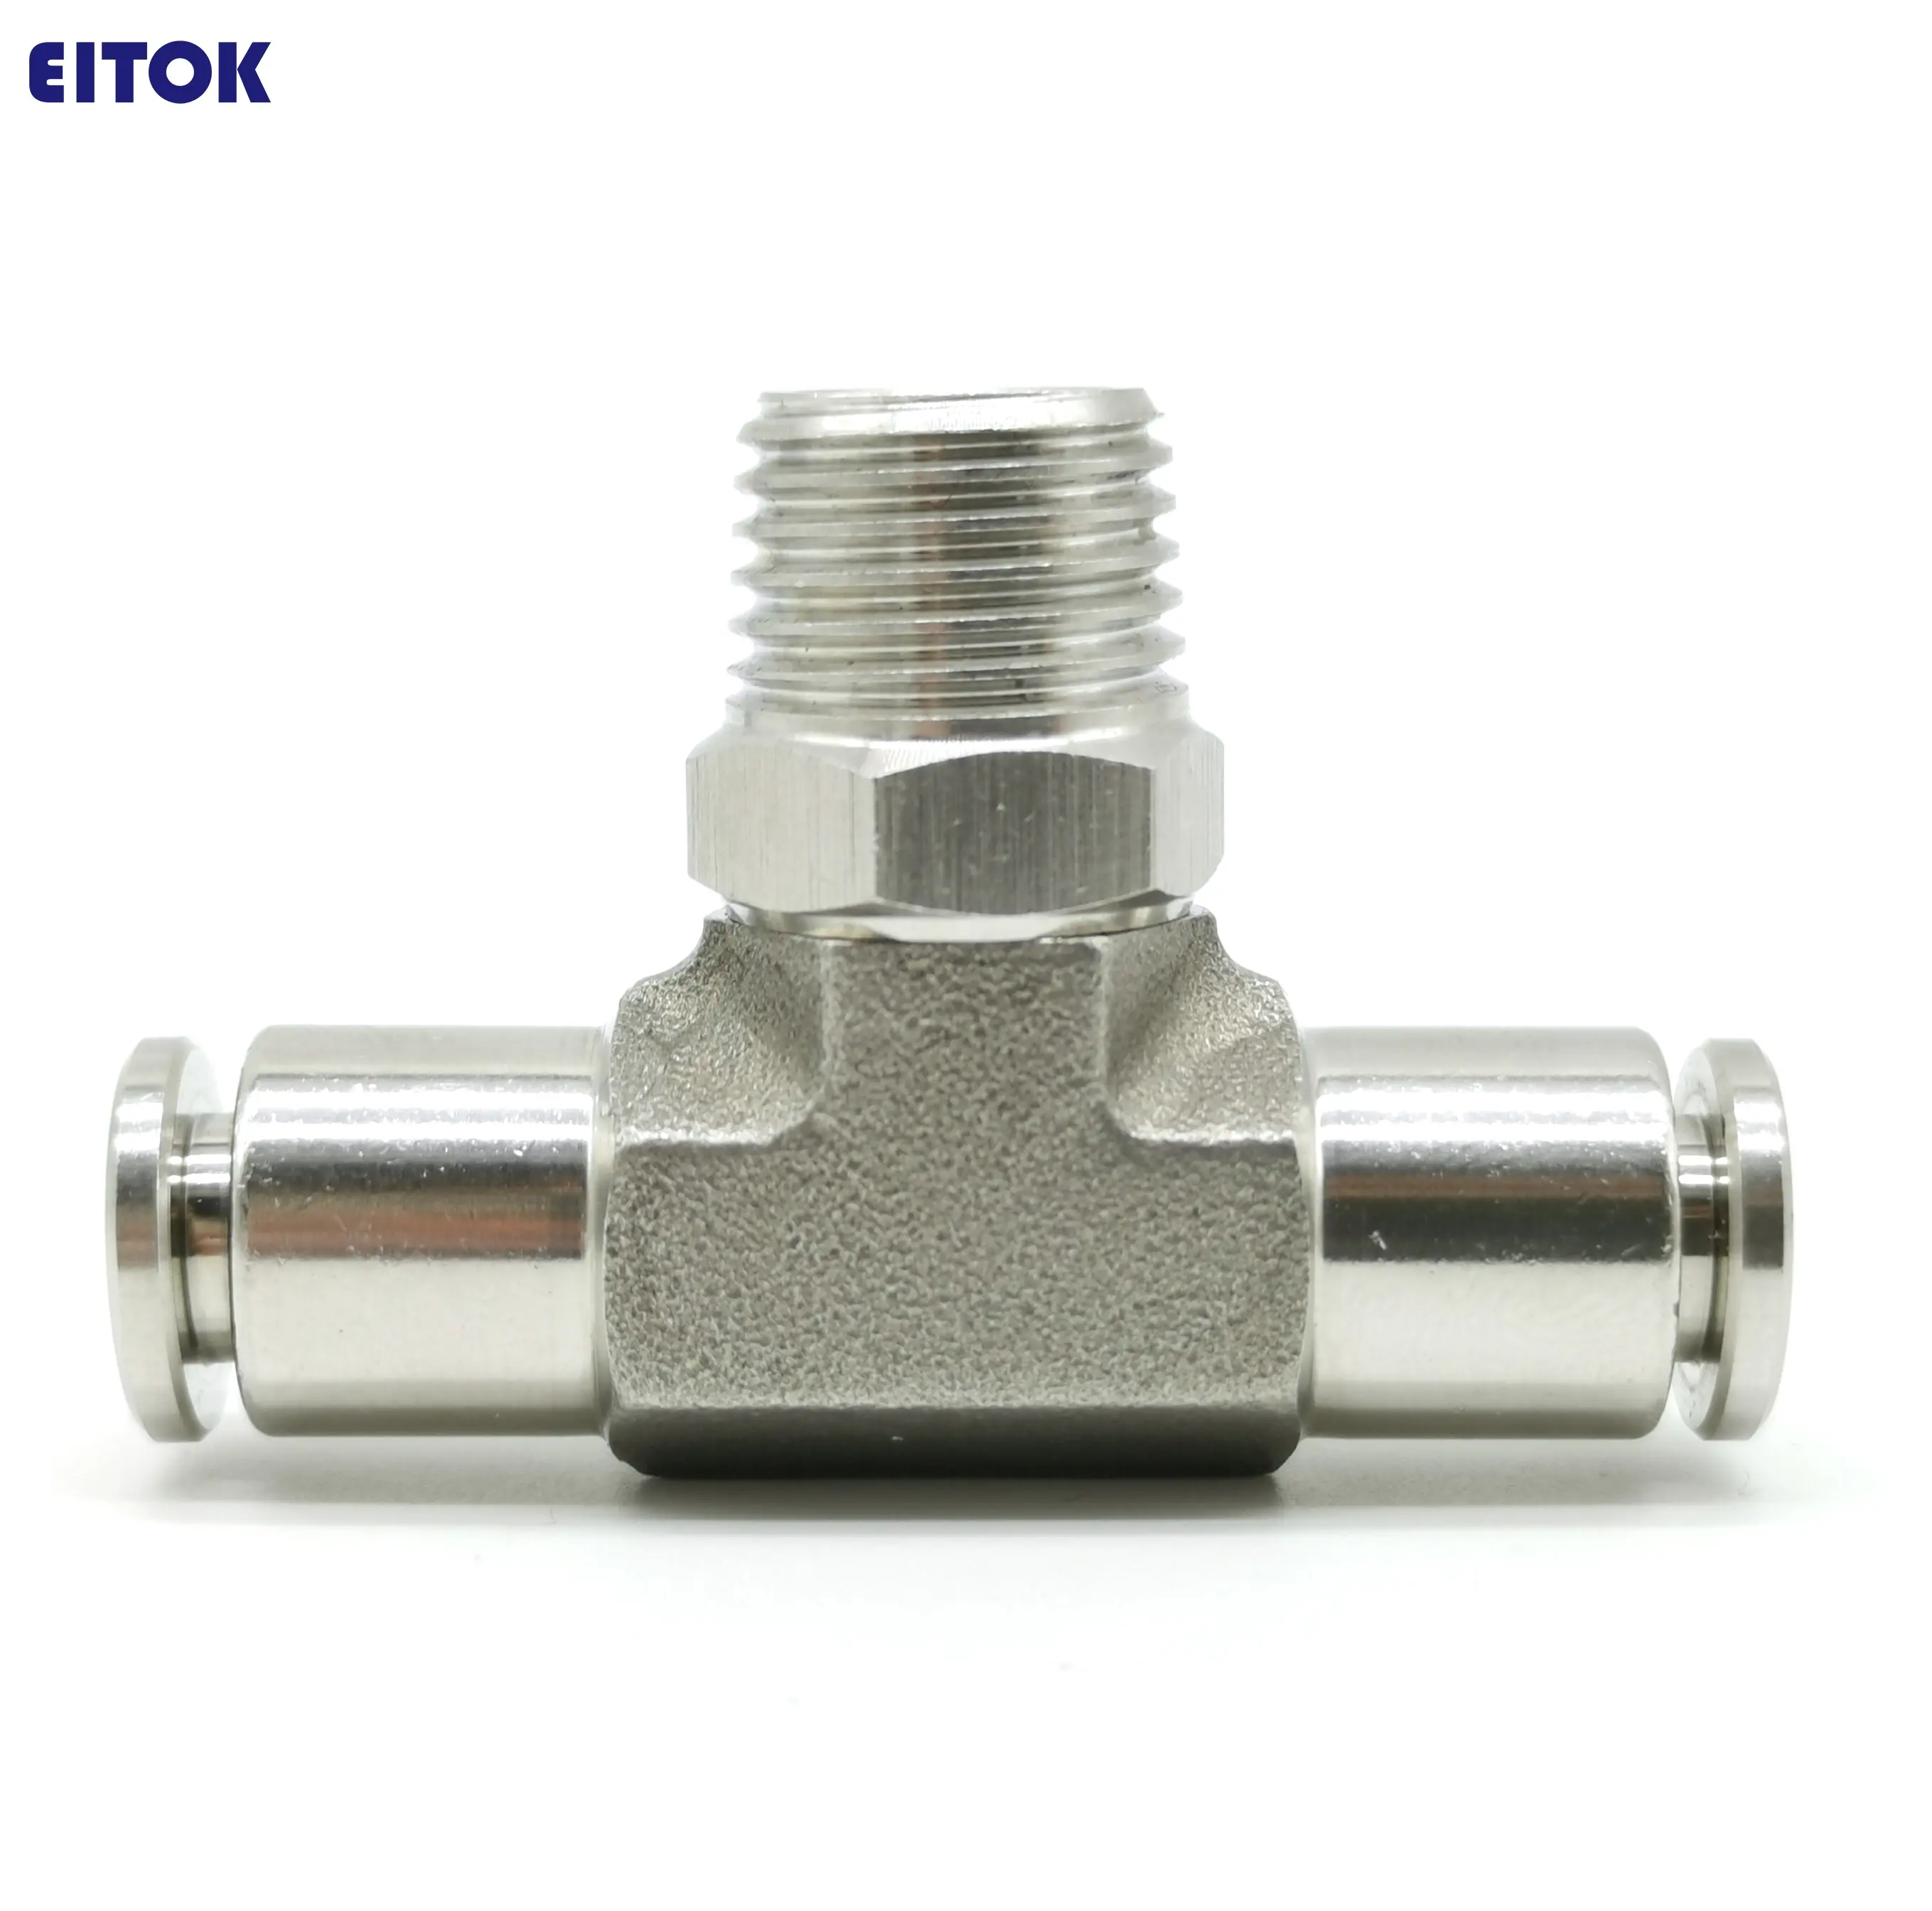 Pneumatic joint push fit push to connect tube fitting push-to-connect air line fitting pex fitting one touch quick connect tee